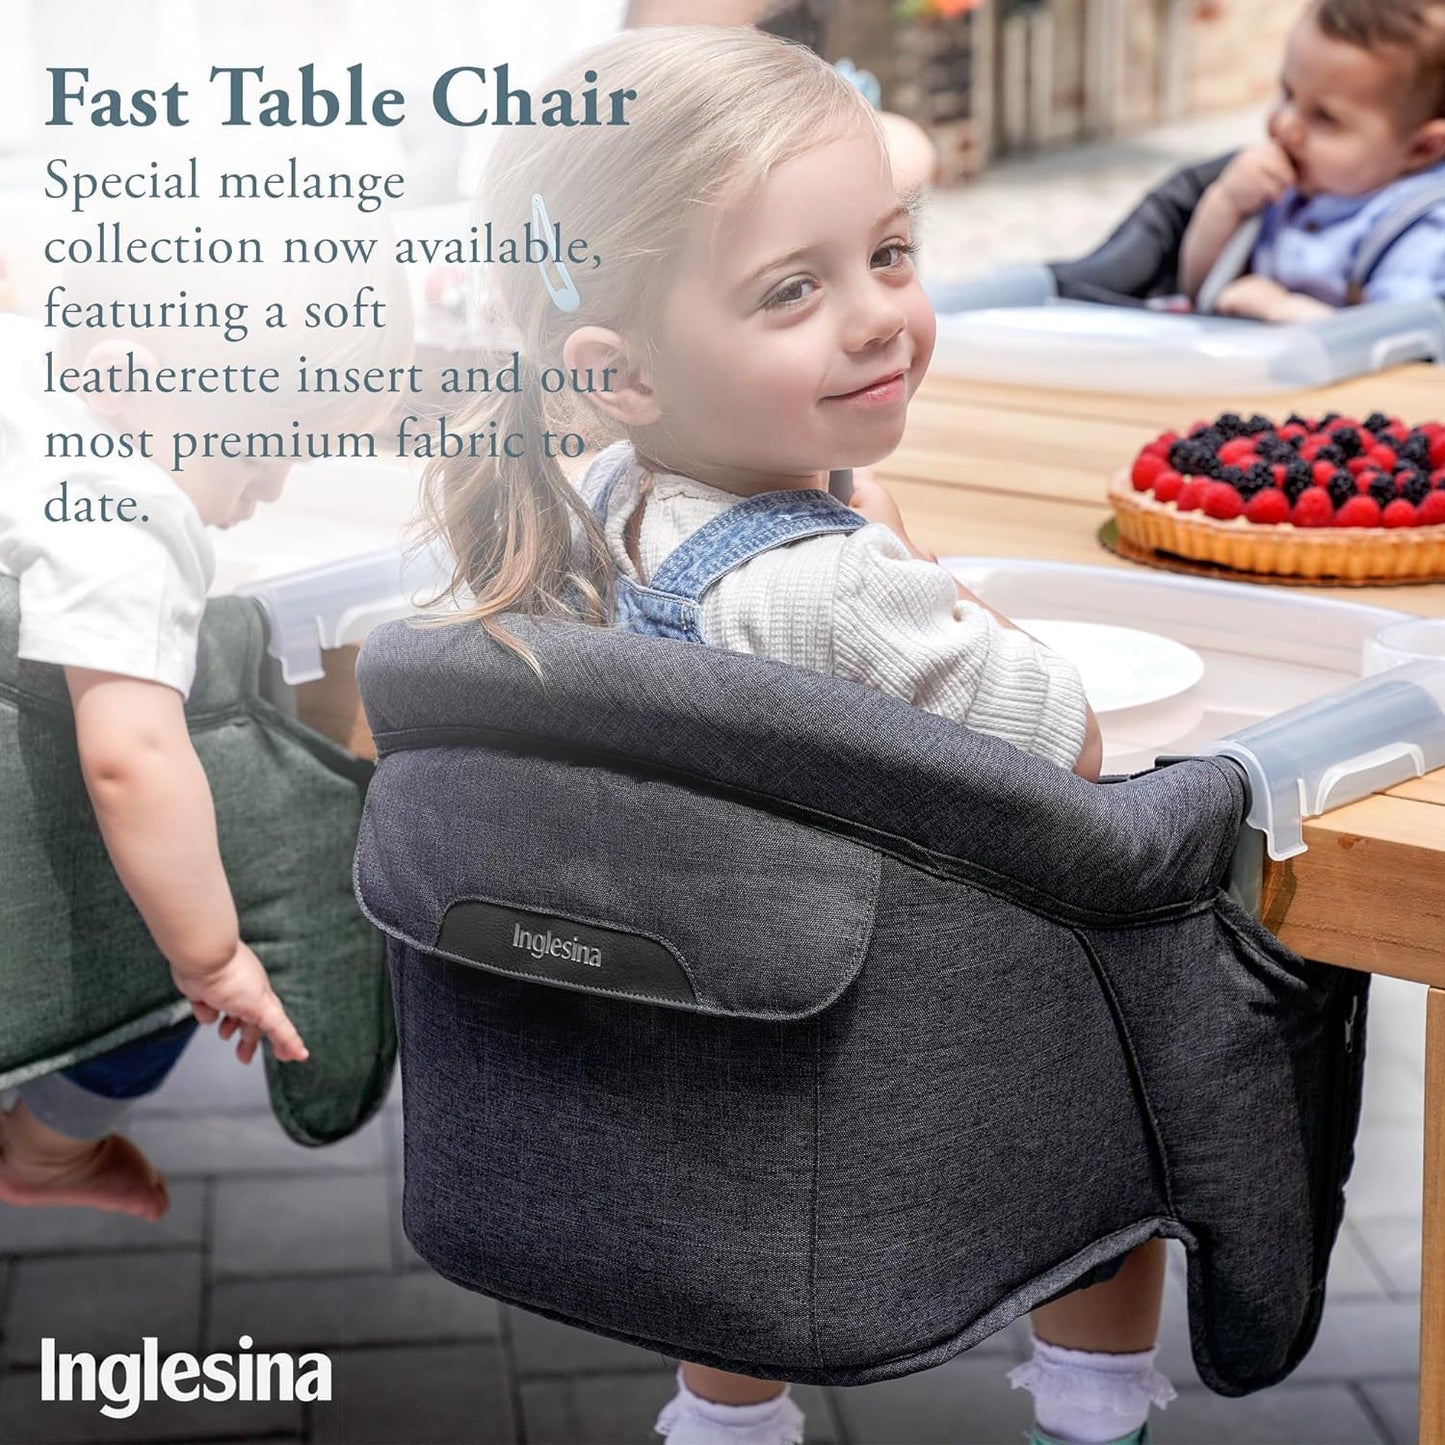 Inglesina Fast Table Chair - Award-Winning Baby High Chair for Eating & Dining - Compact, Portable & Foldable - Leaves No Scratches - for Babies 6-36 Months & 1-3 Year Old Toddler - Black